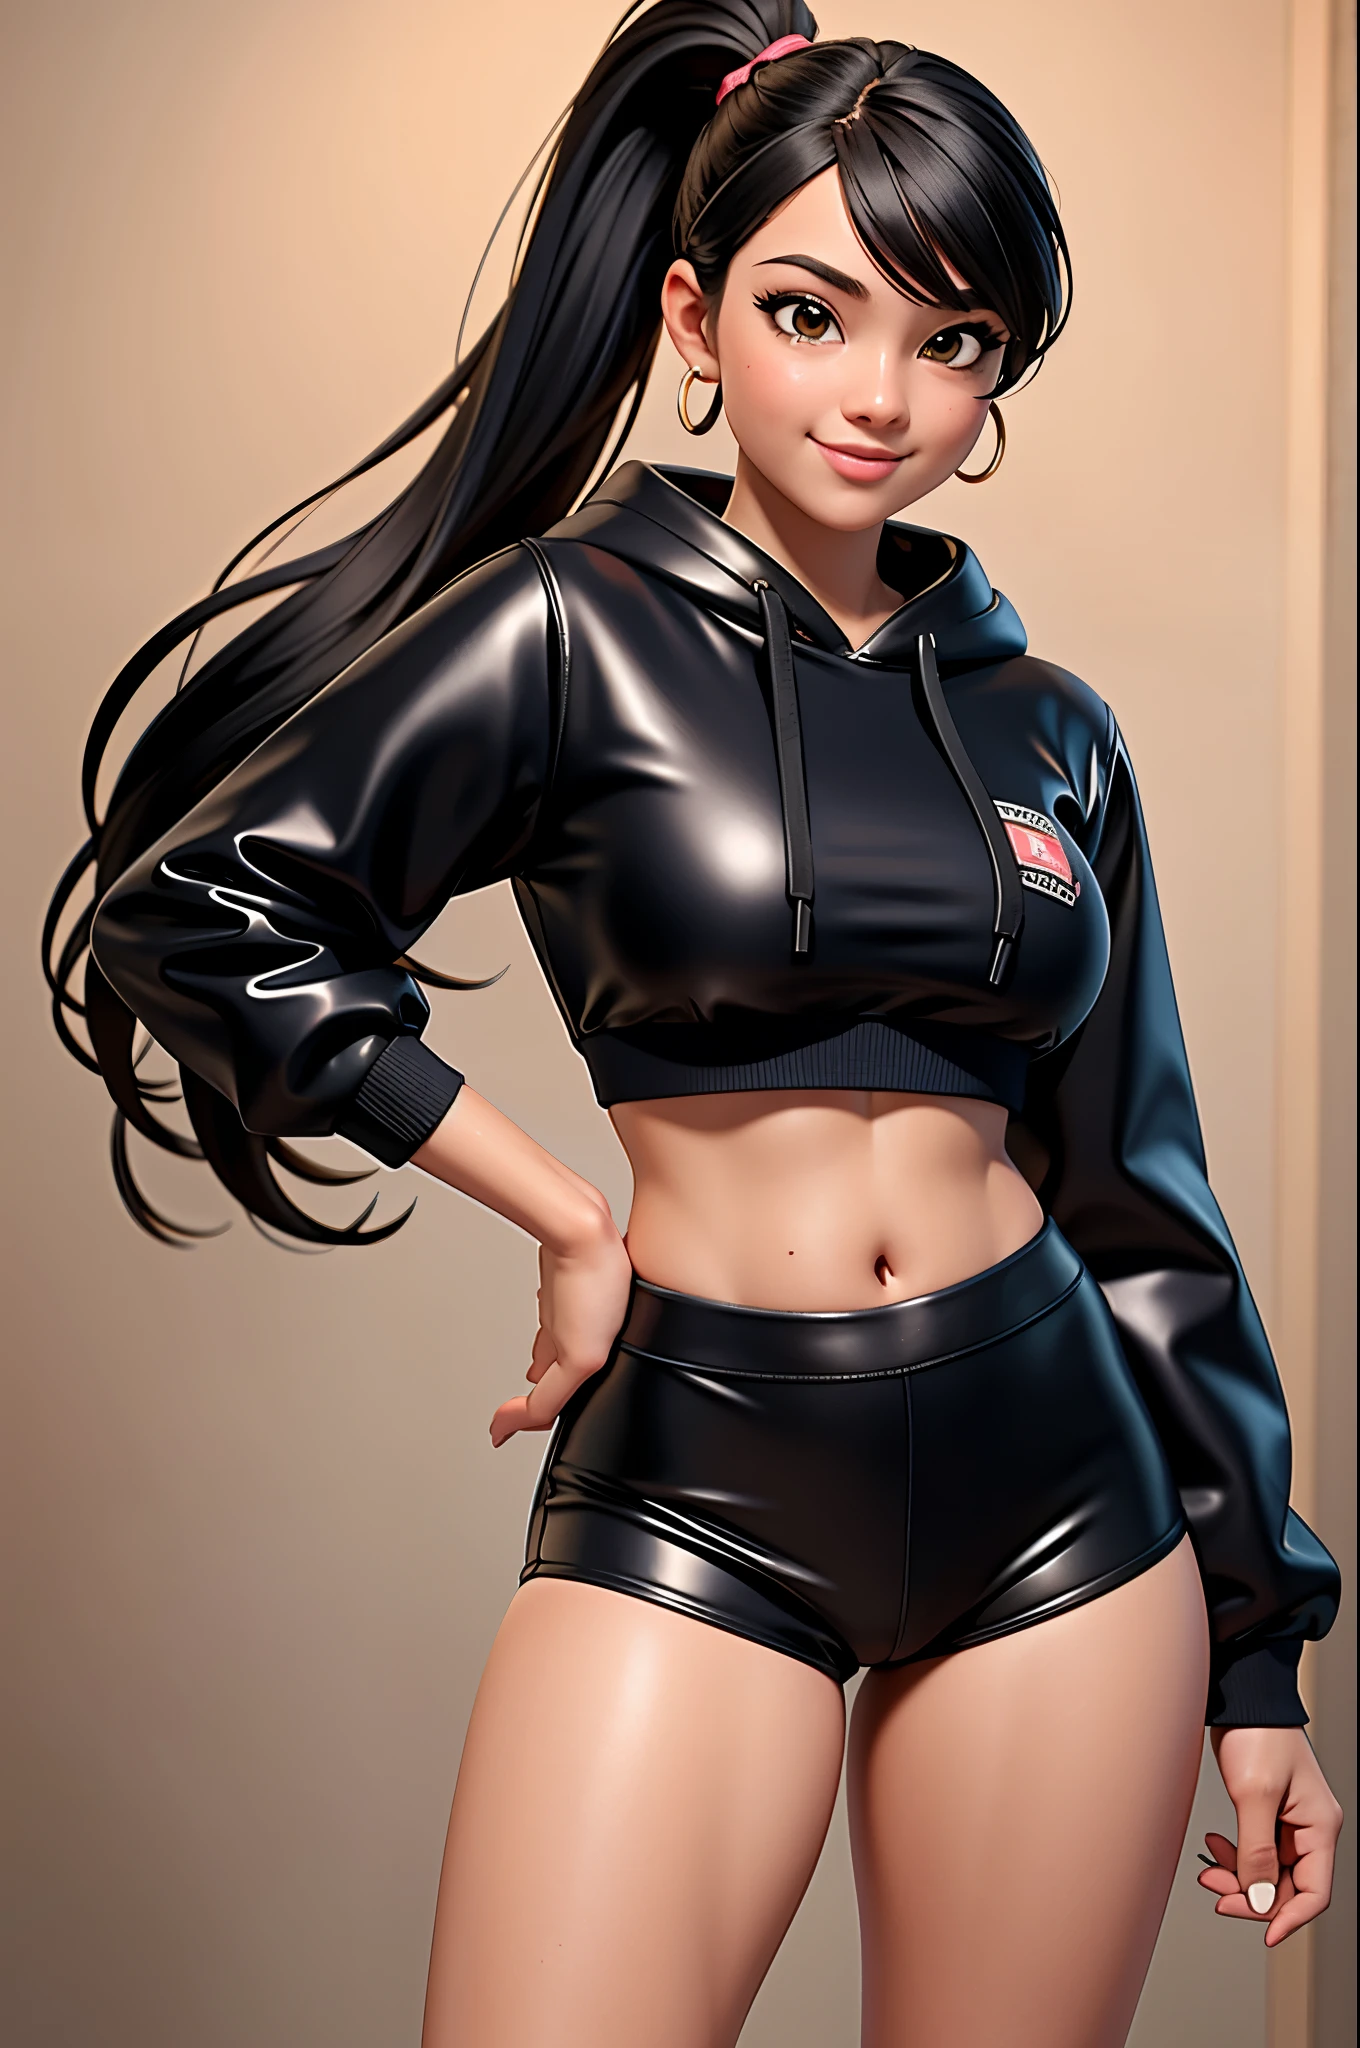 Woman, age 20 years, Ponytail, They are smiling, crop top hoodie, (Masterpiece, Best quality, High Resolutions), latex short shorts